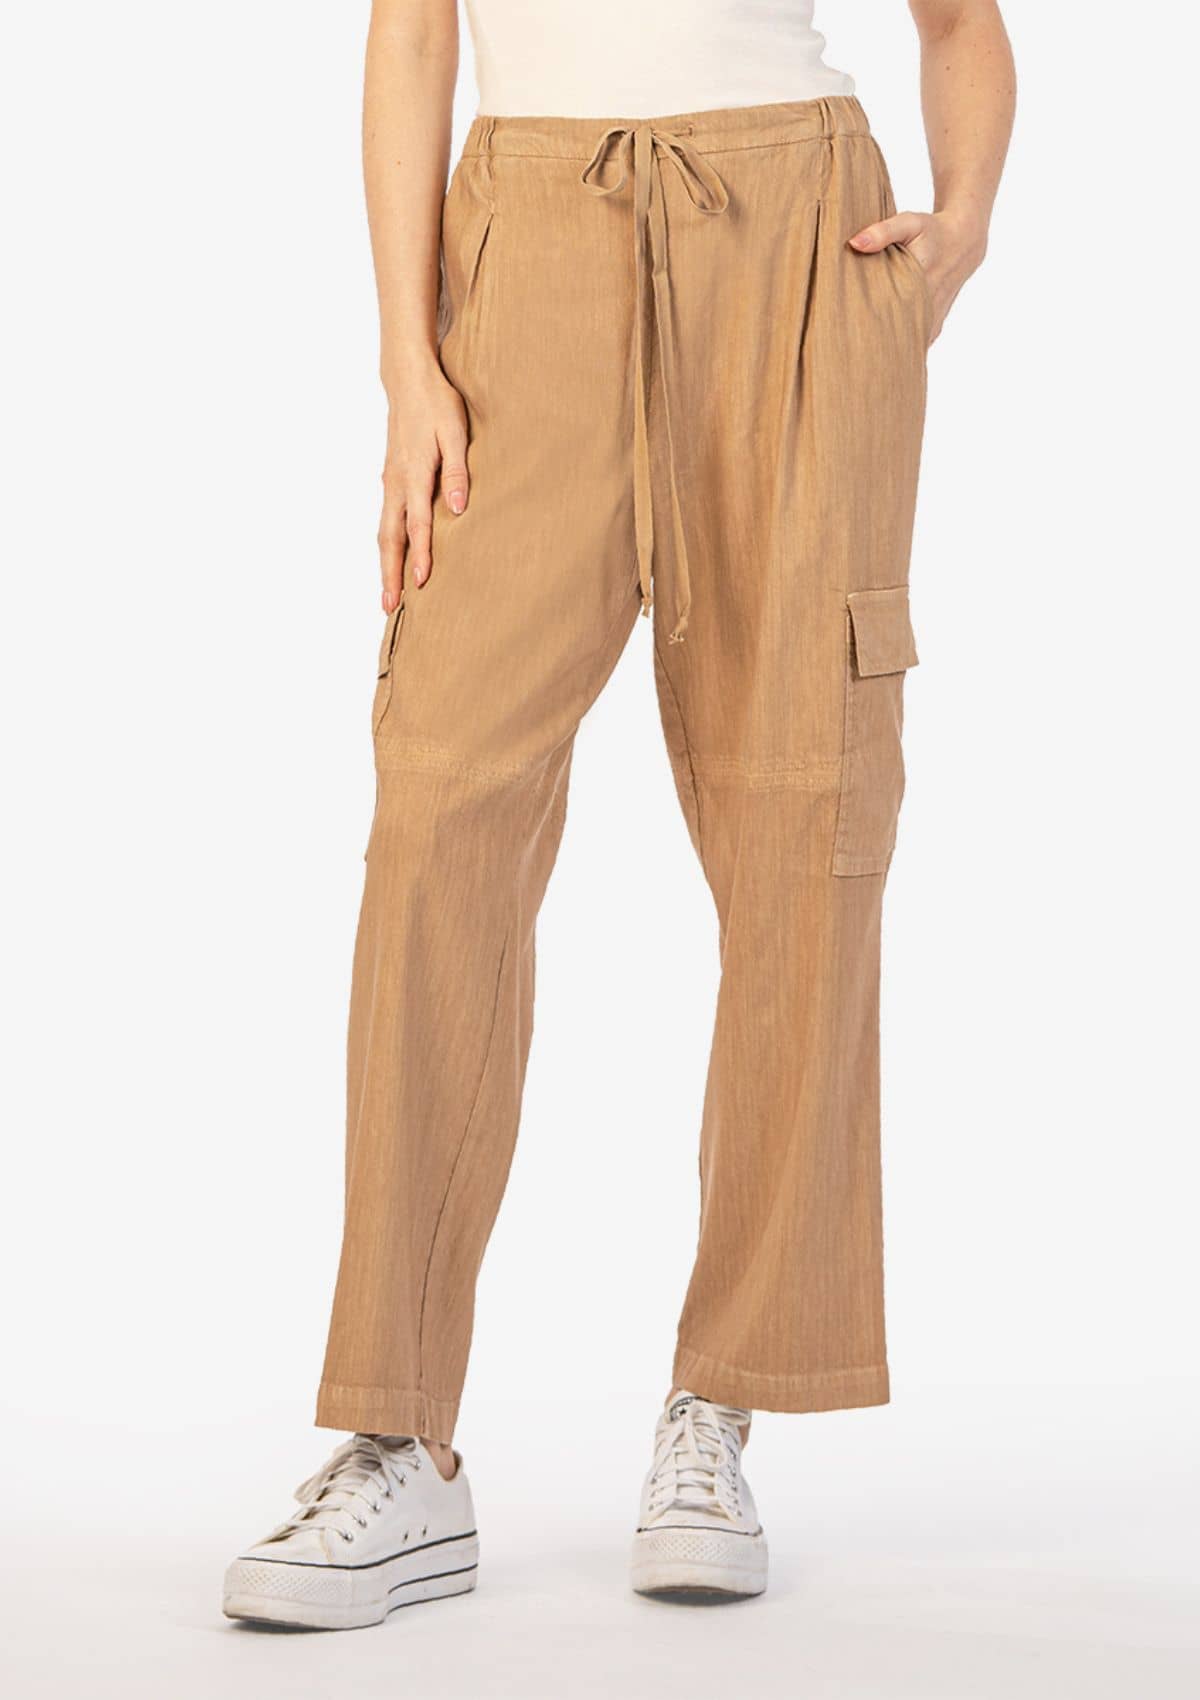 Sienna Pants with Elastic Waist - Oatmeal -Swat Fame KUT ONLY -NO See Thru Soul- Ruby Jane-